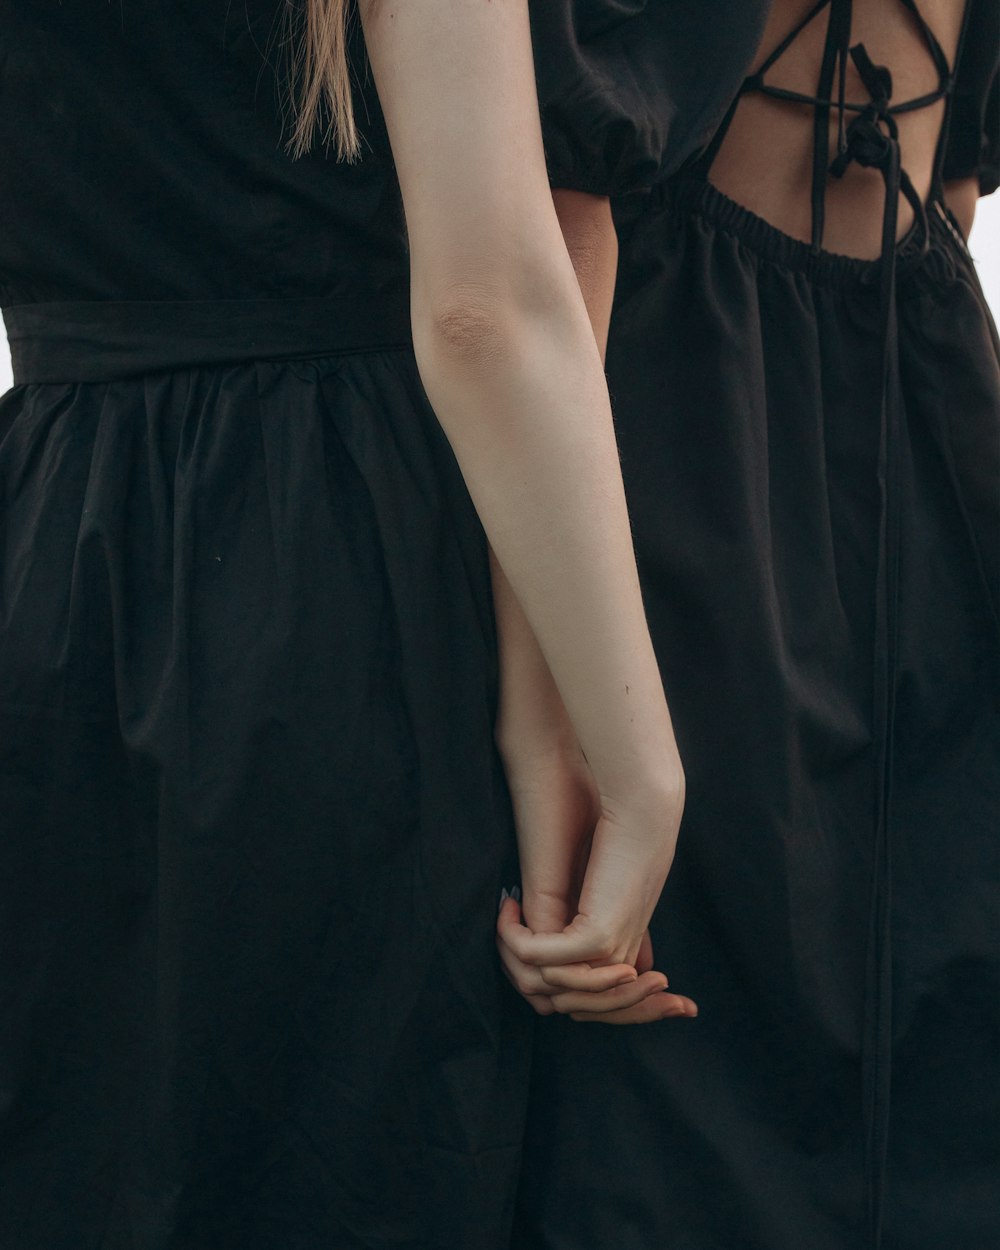 two women standing next to each other holding hands